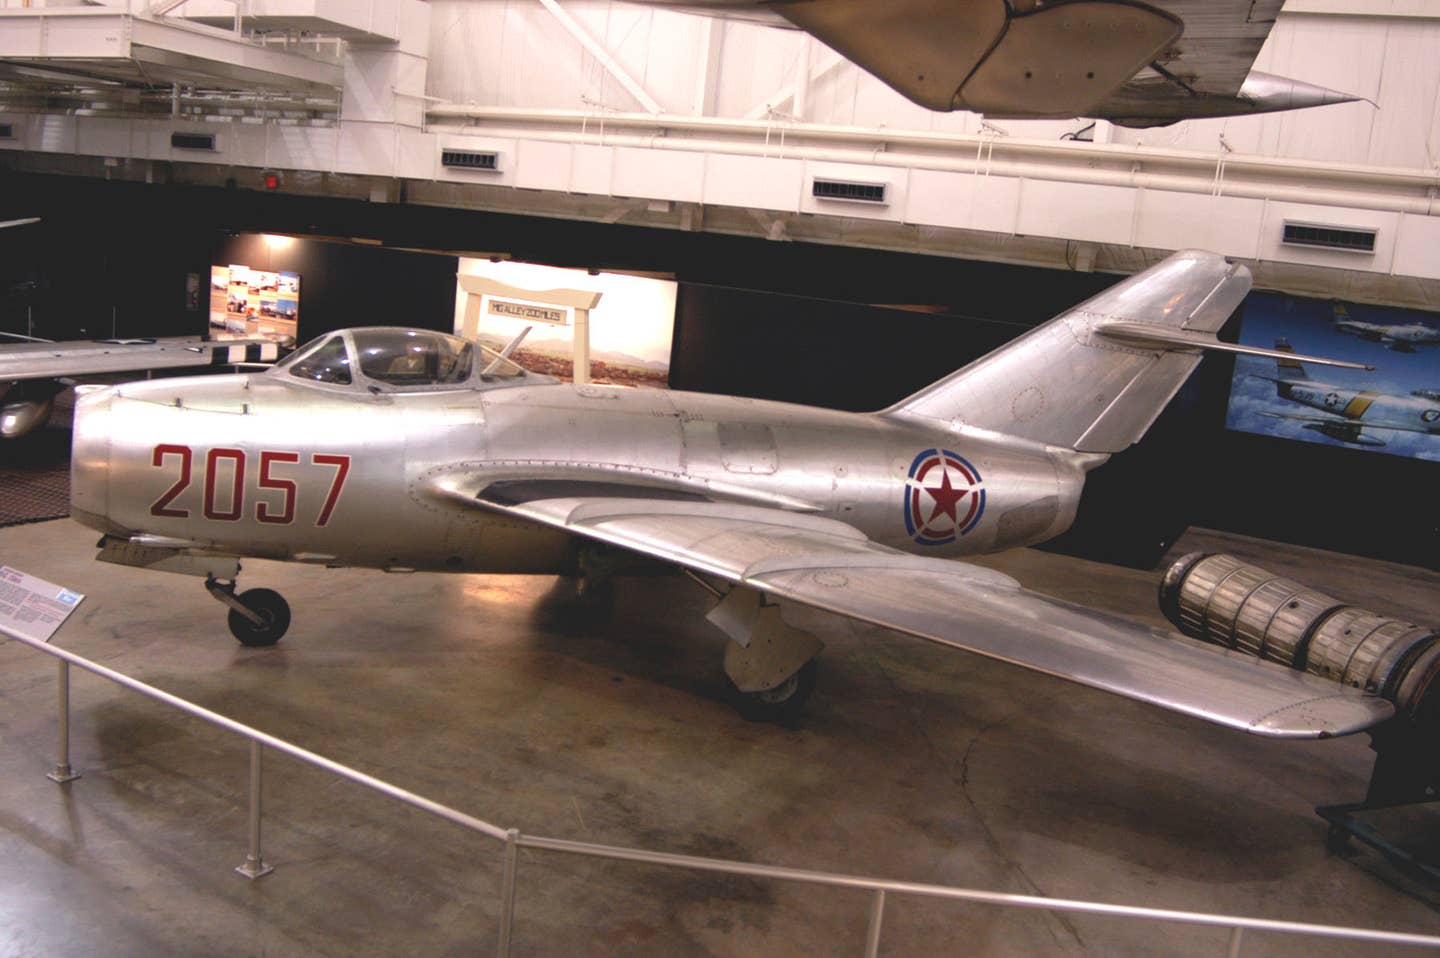 MiG-15 at the National Museum of the United States Air Force. (U.S. Air Force photo)